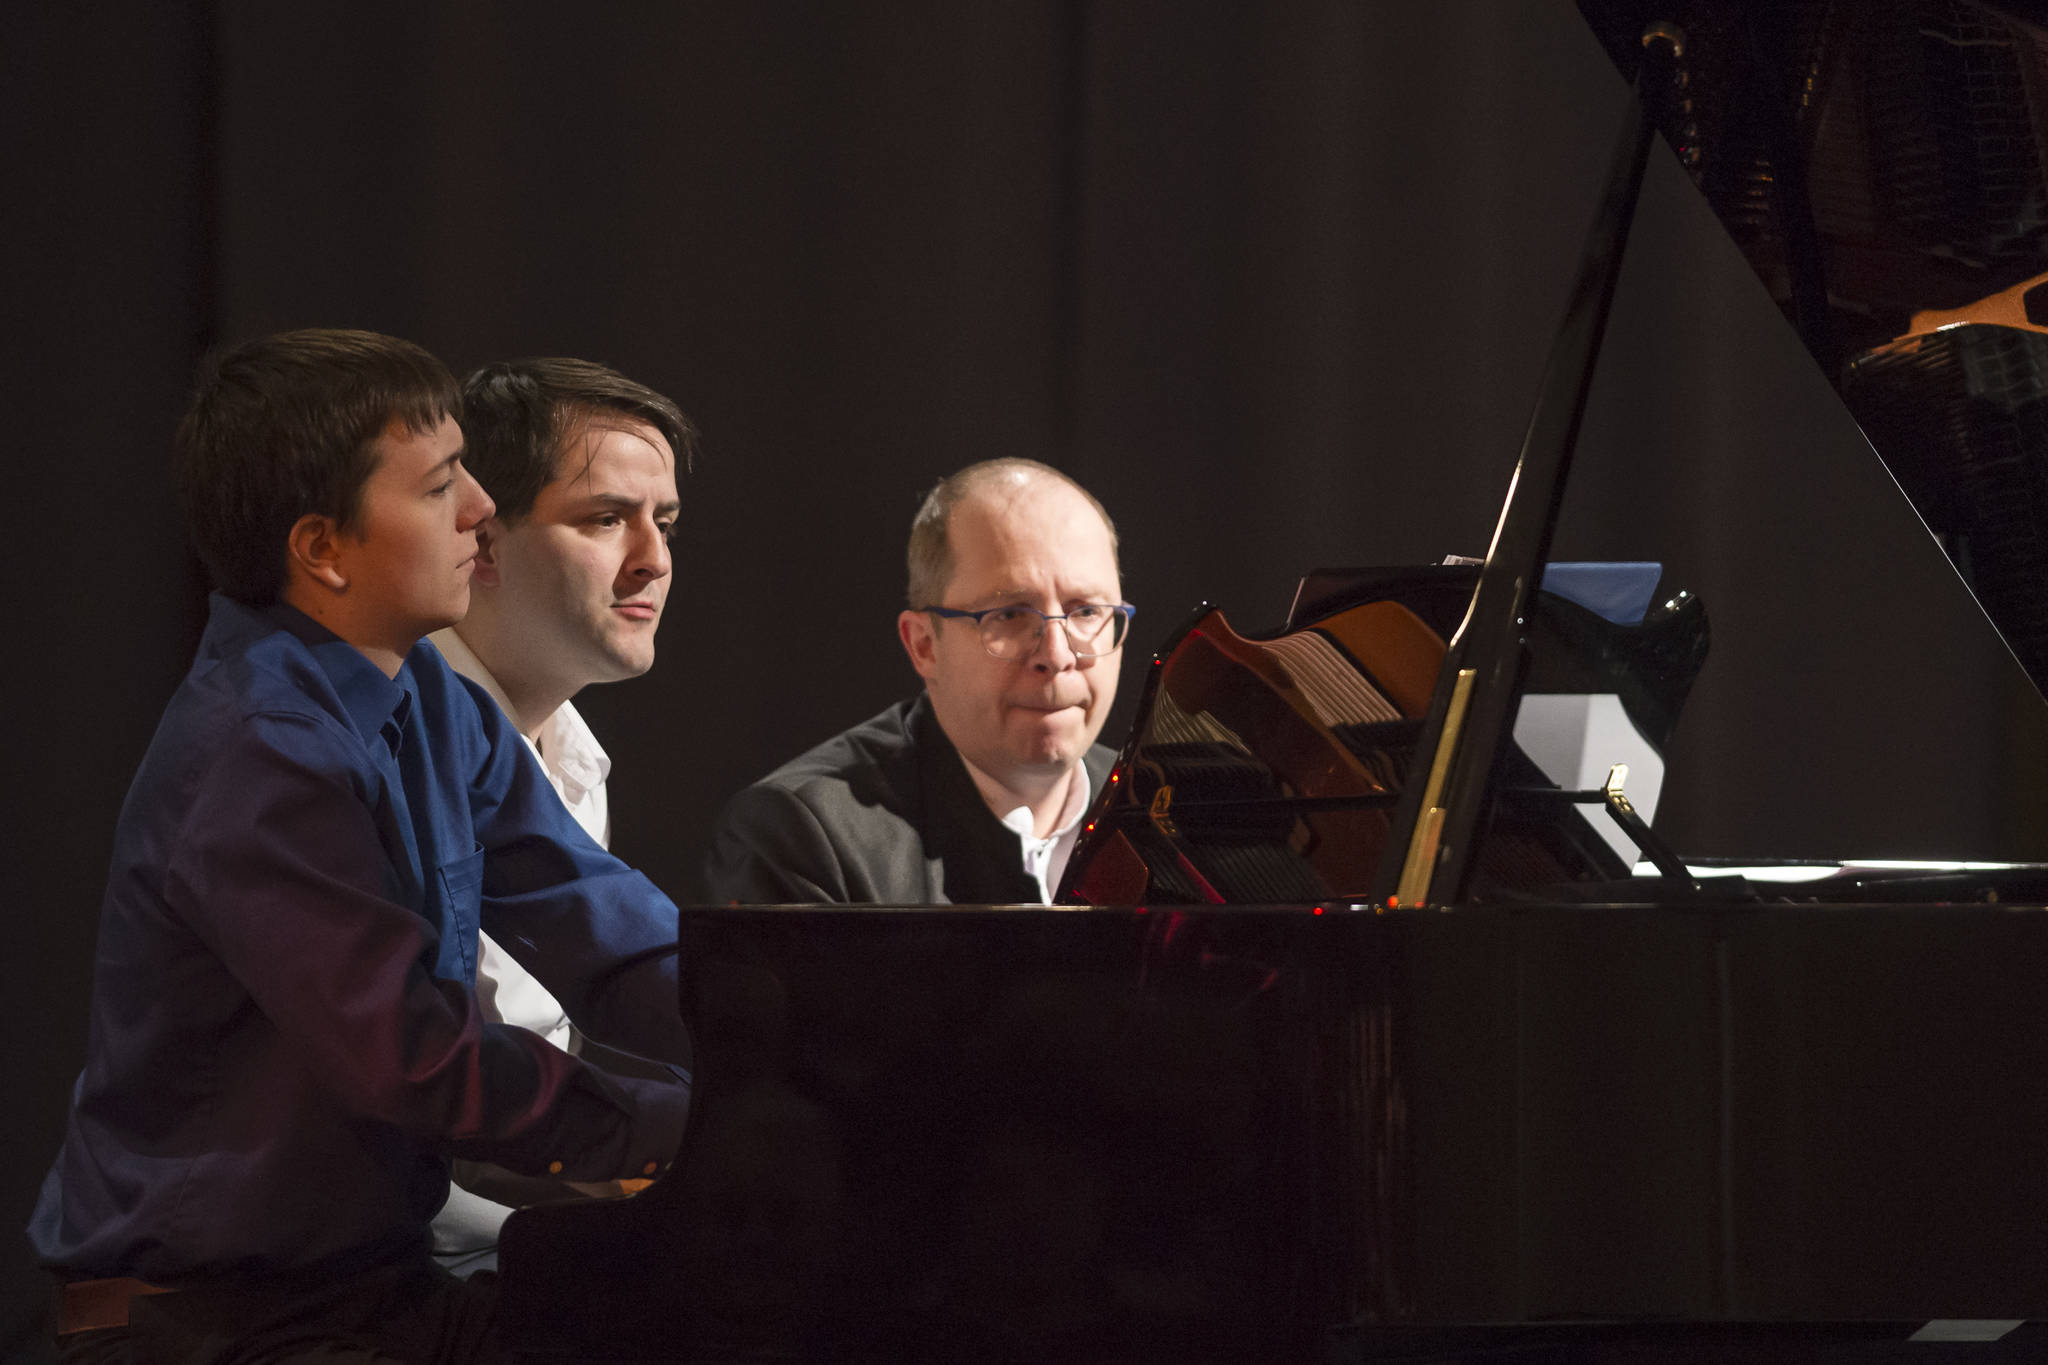 Kyle Farley-Robinson, left, Jon Hays, center, and Dr. Alexander Tutunov play Romance And Waltz For Six Hands Piano by Sergei Rachmaninoff during the Juneau Piano Series featuring Dr. Tutunov at the Juneau Arts & Culture Center on Friday, Jan. 18, 2019. (Michael Penn | Juneau Empire)